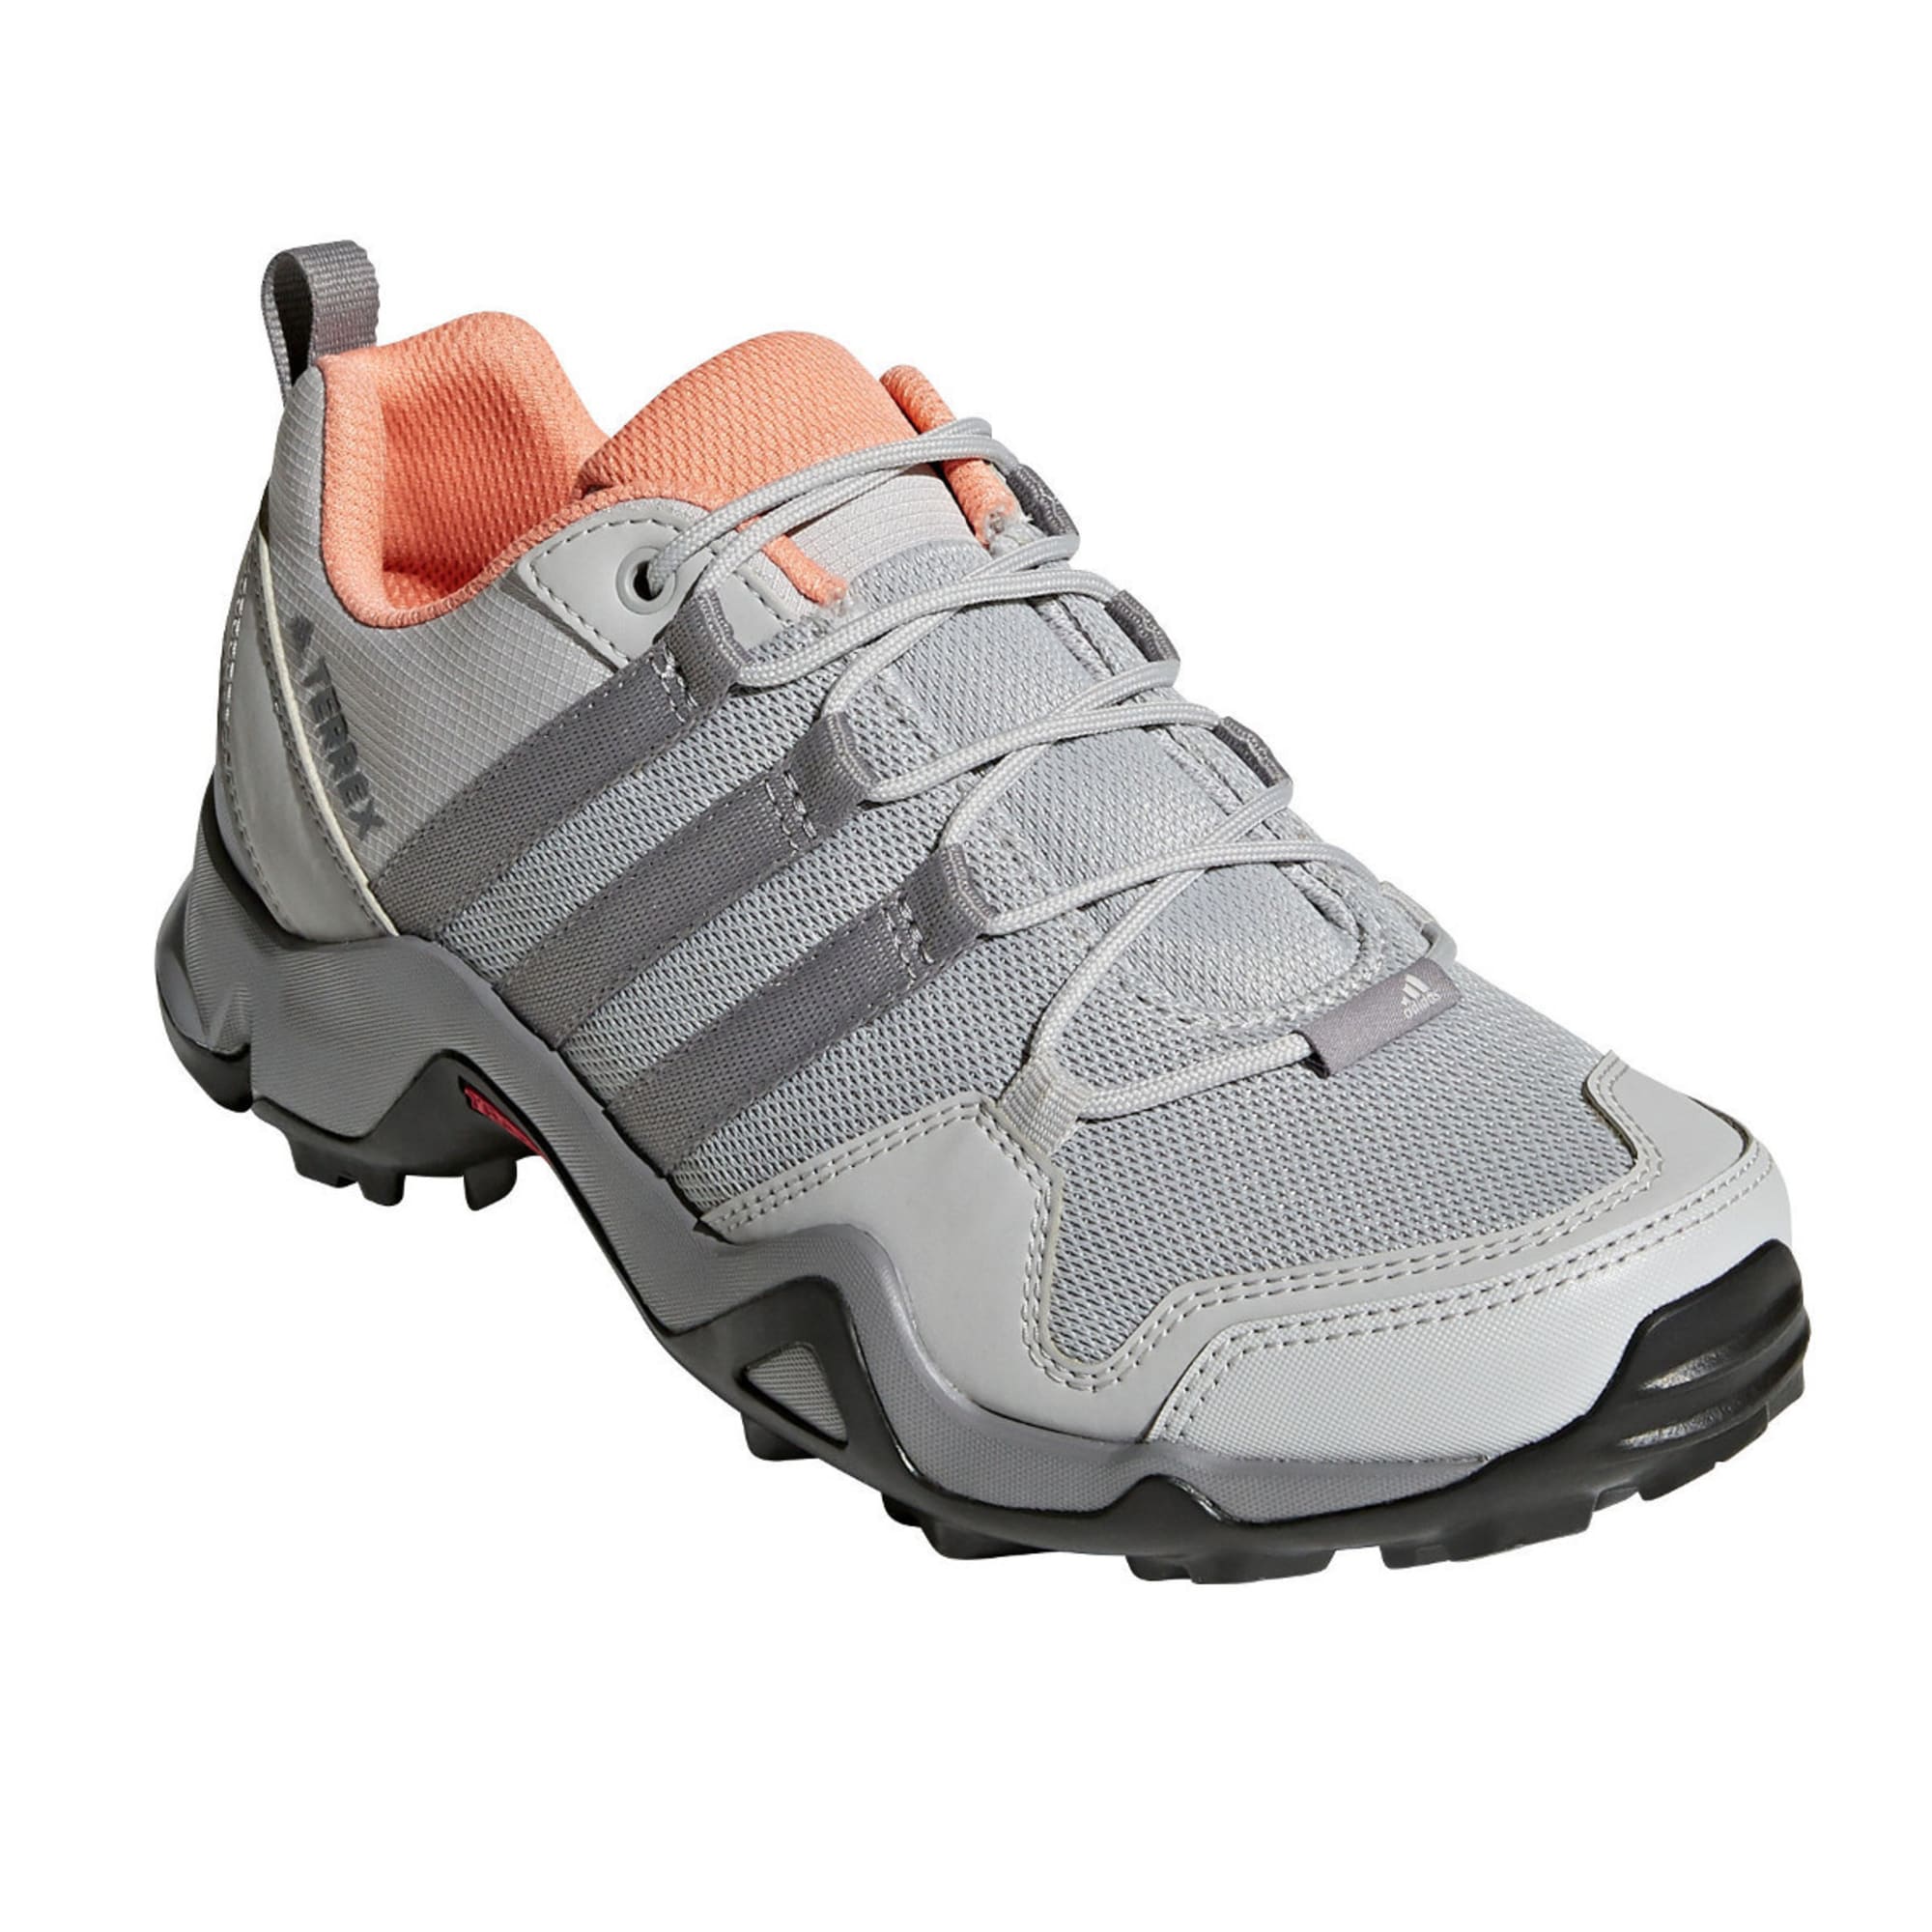 trampa oasis Marchito ADIDAS Women's Terrex AX2R Hiking Shoes, Black/Tactile Pink - Bob's Stores